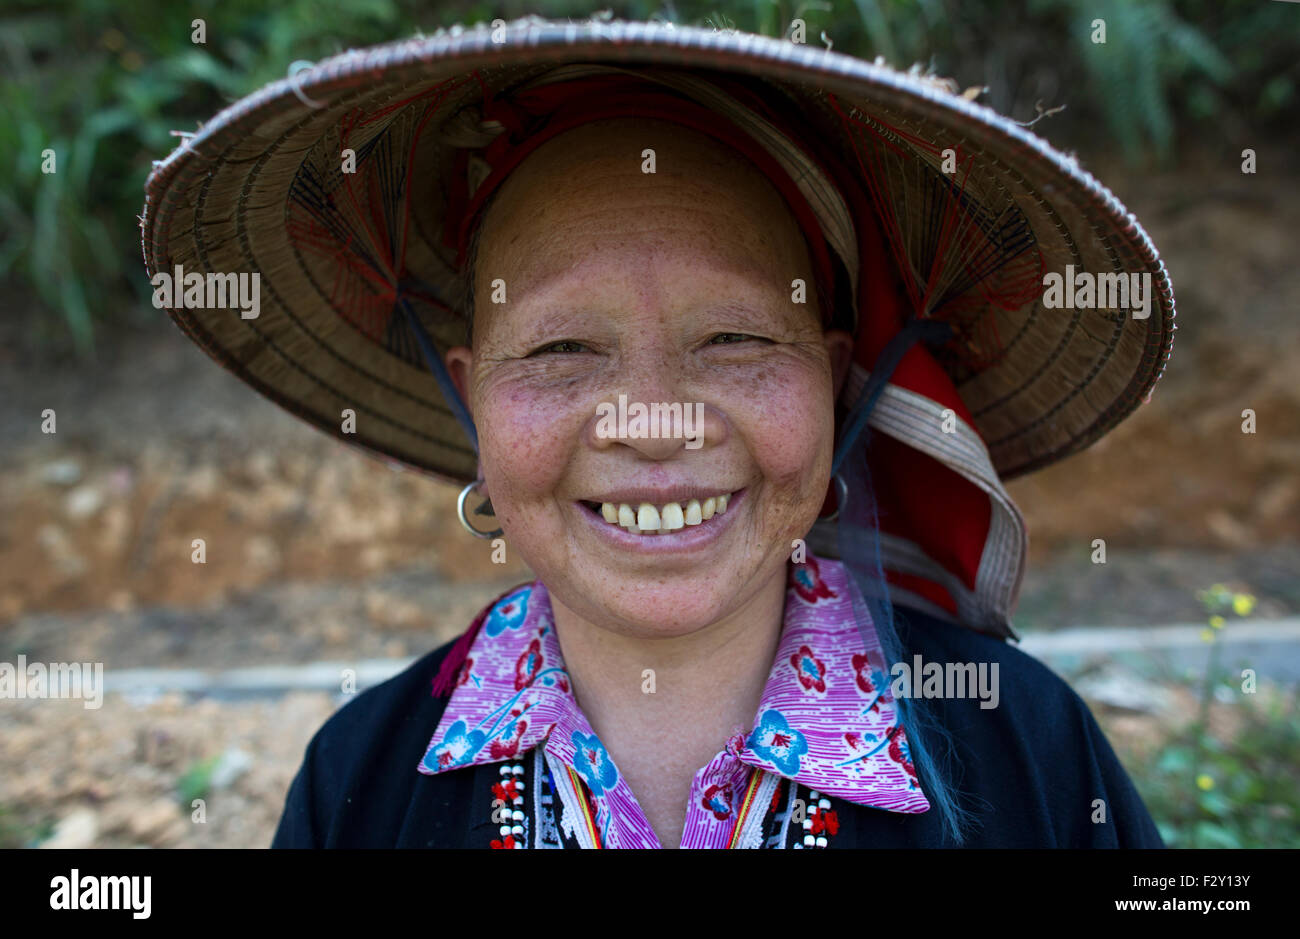 Ethnic 'flower Hmong' tribe in Northern Vietnam. Stock Photo